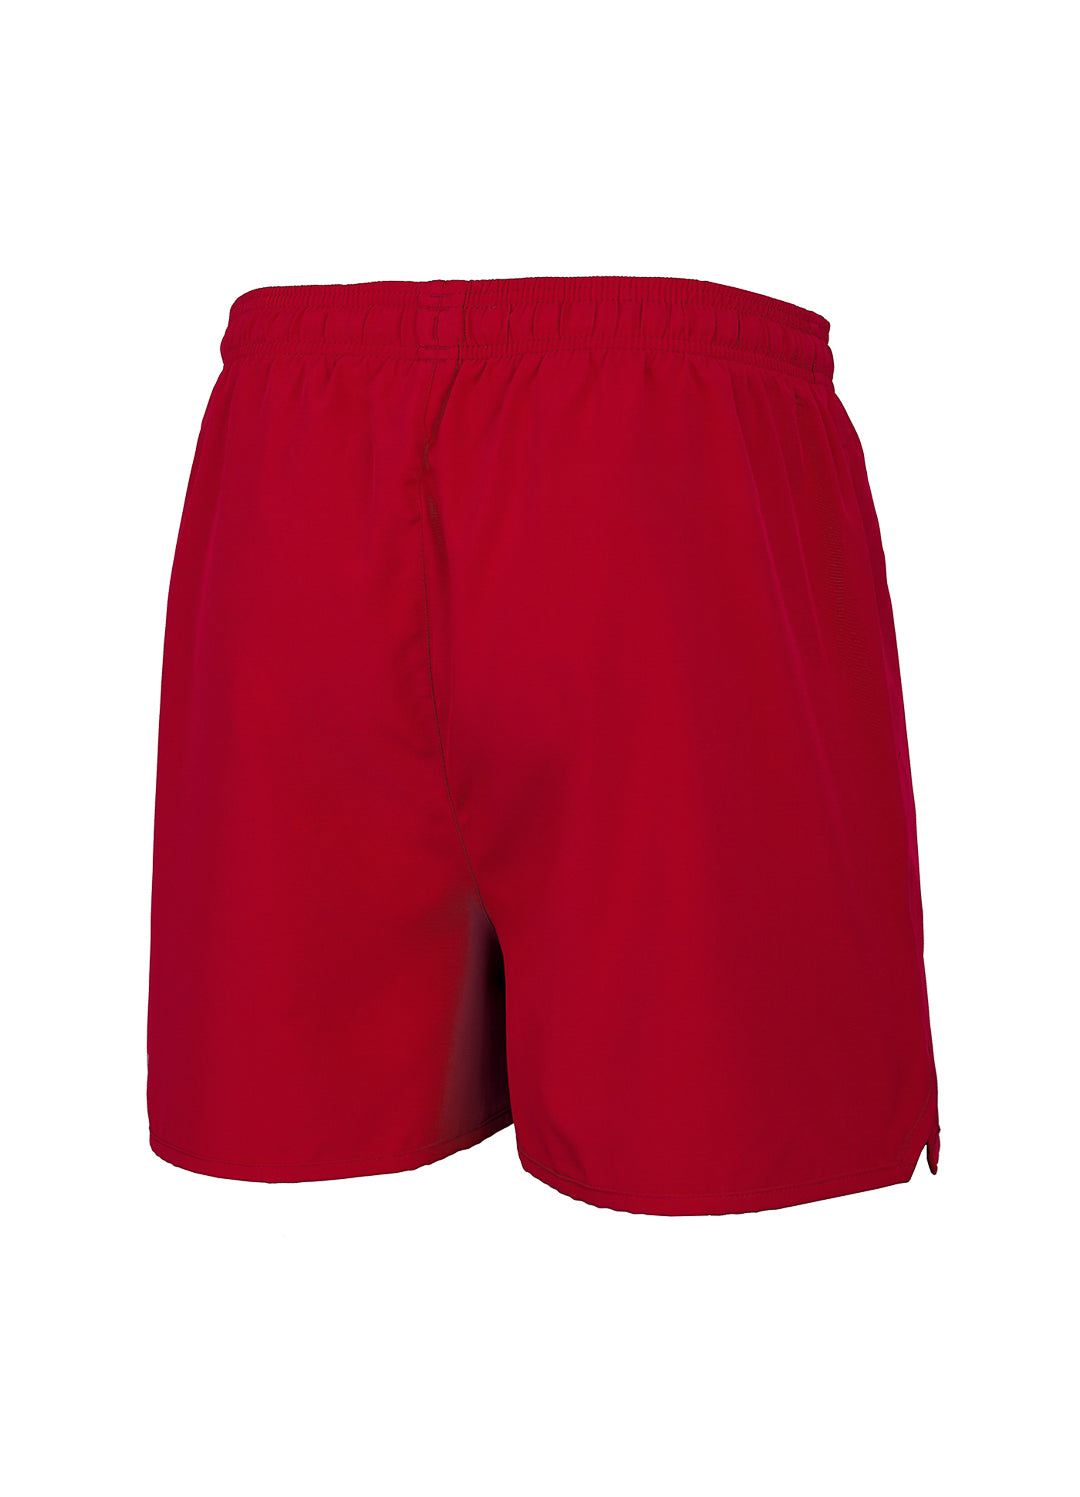 SMALL LOGO 2 Performance Red Shorts